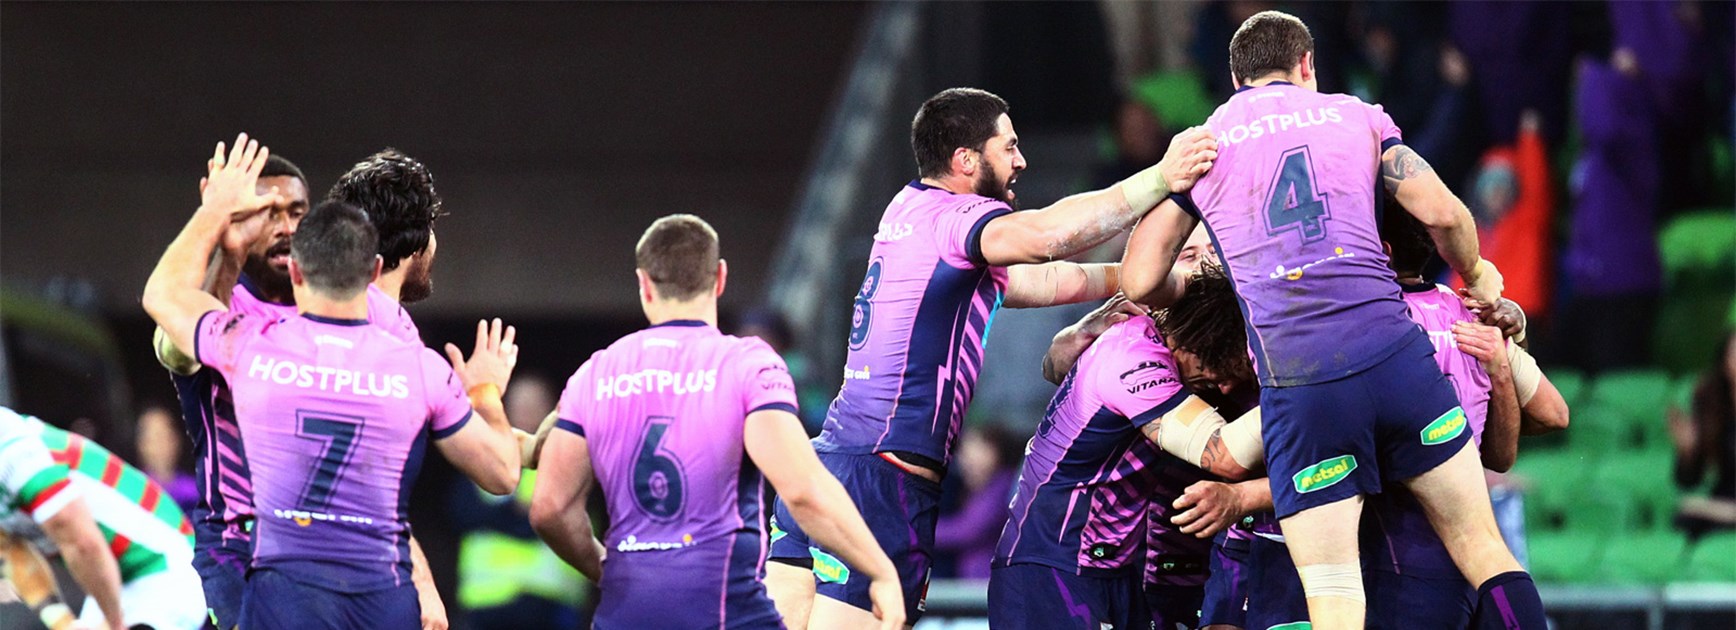 The Melbourne Storm celebrate Cameron Smith's match-winning field goal against the Rabbitohs in Round 22.